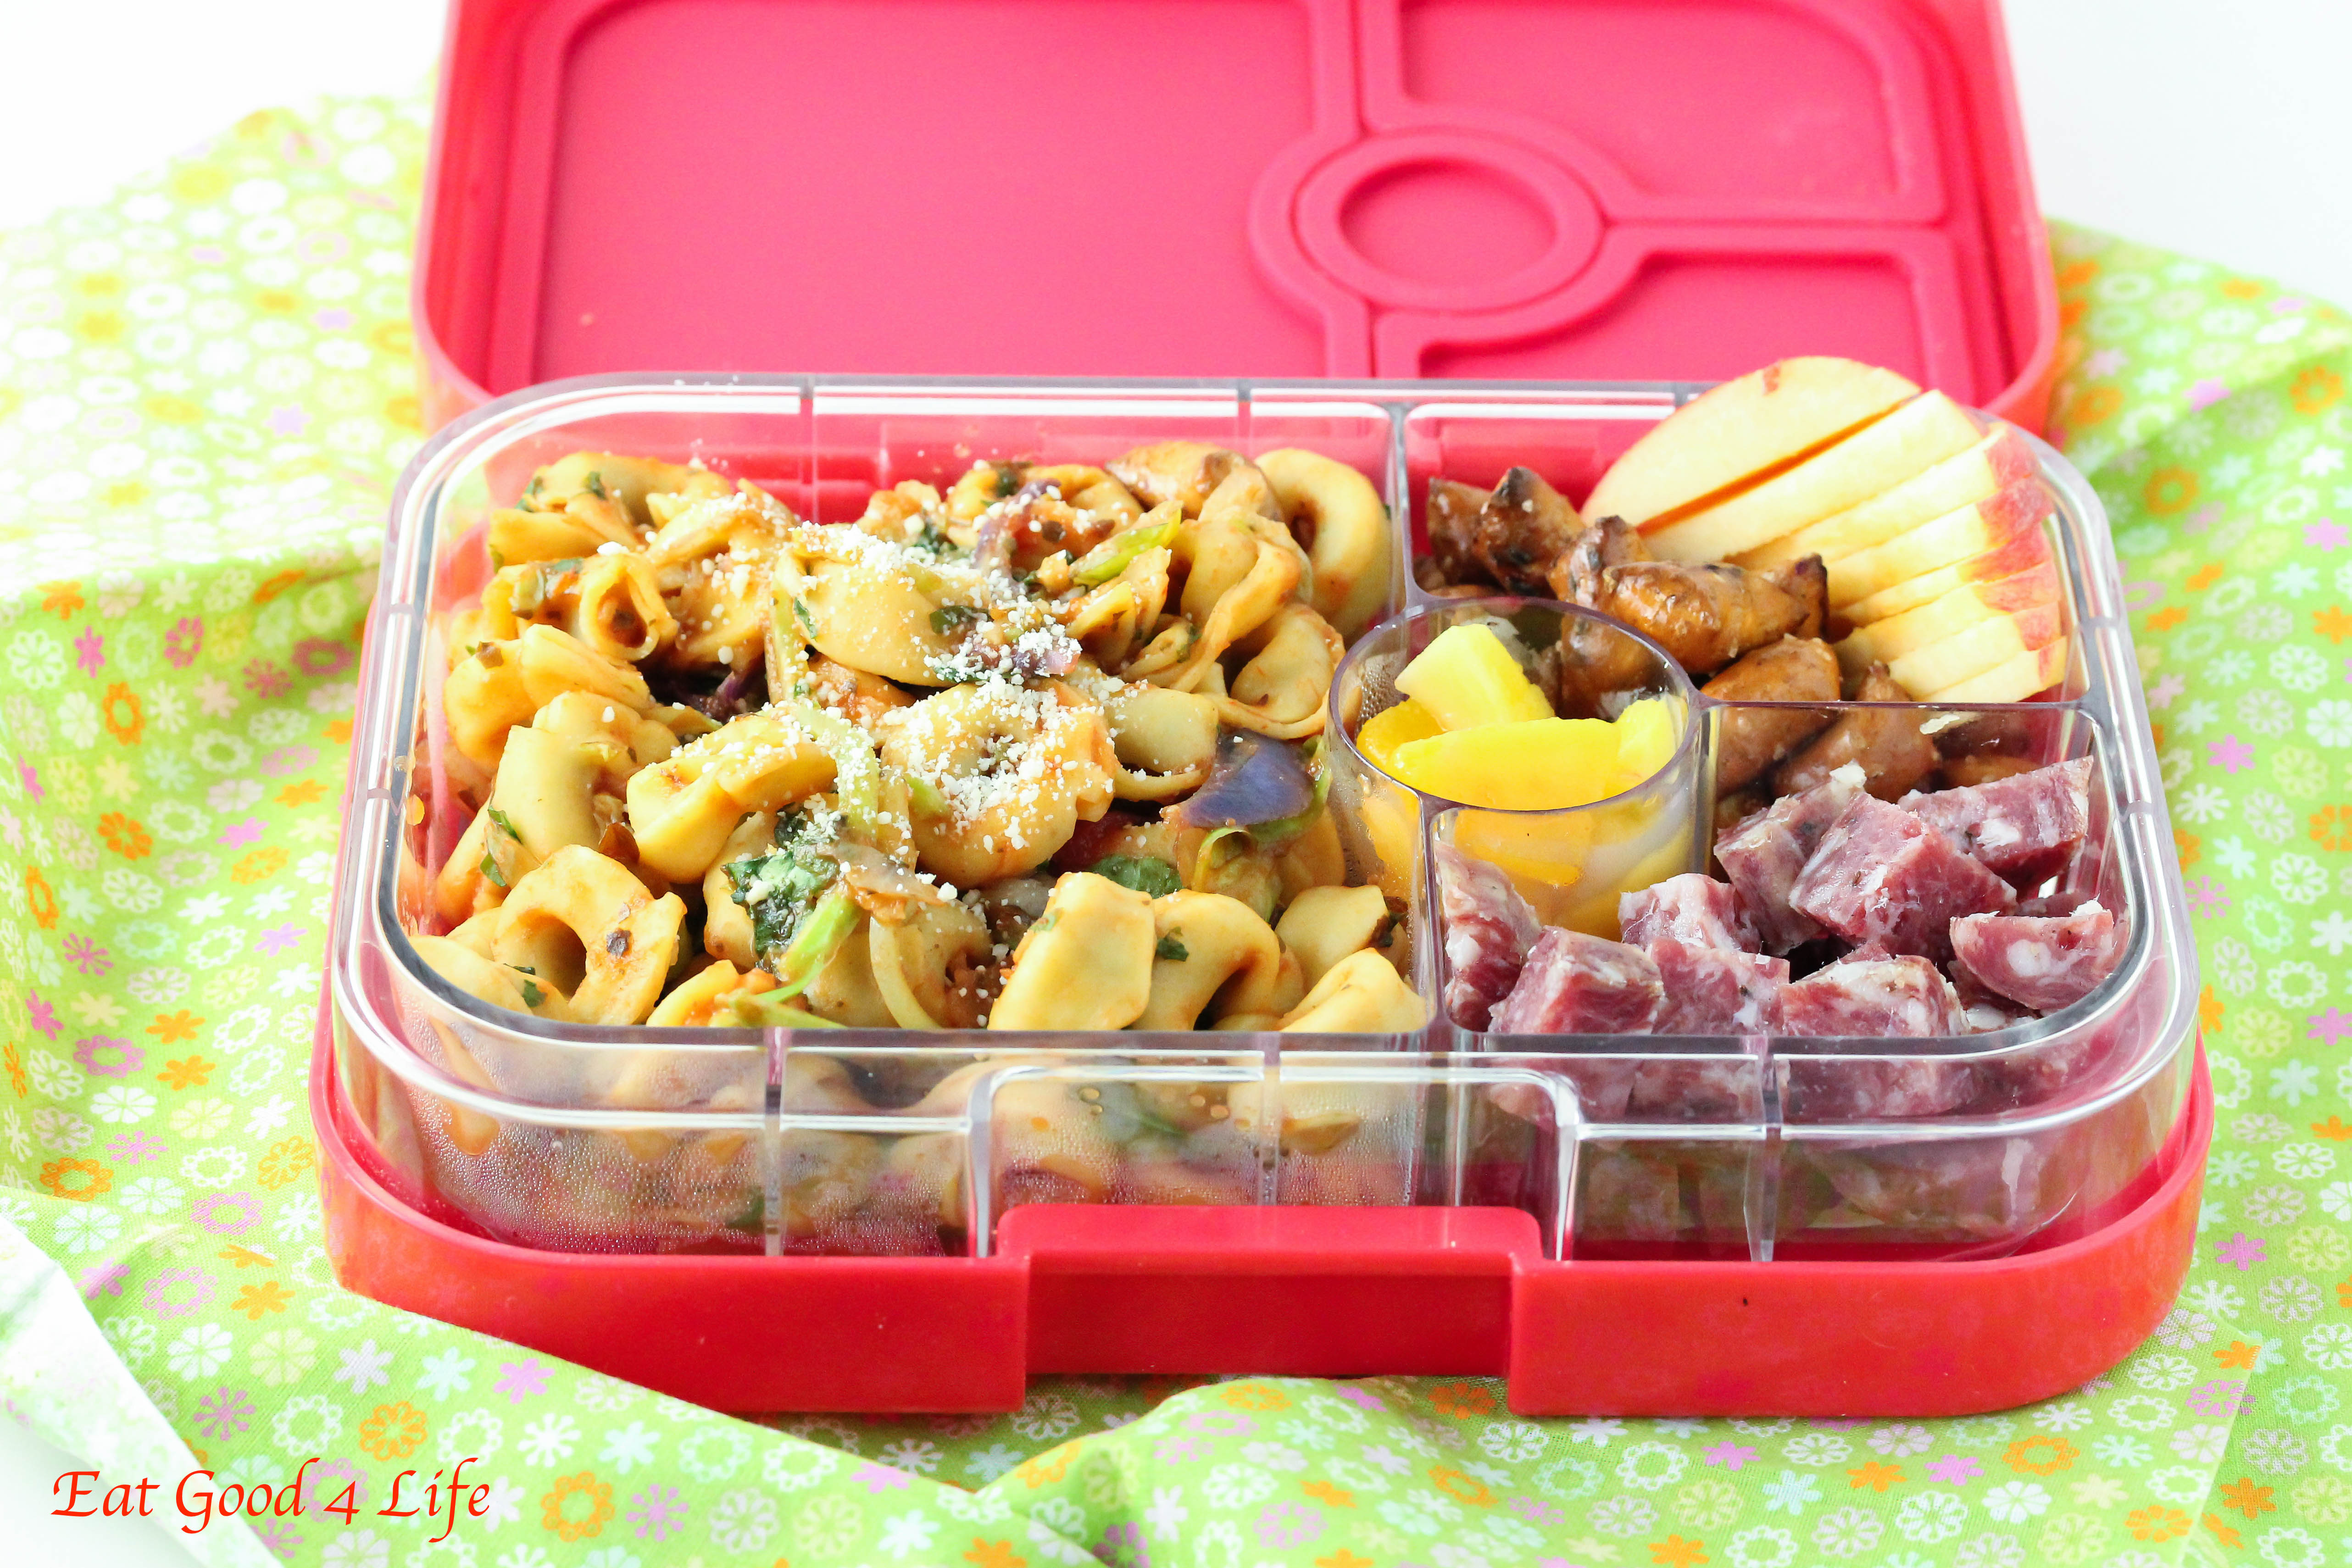 Lunch box recipes - two